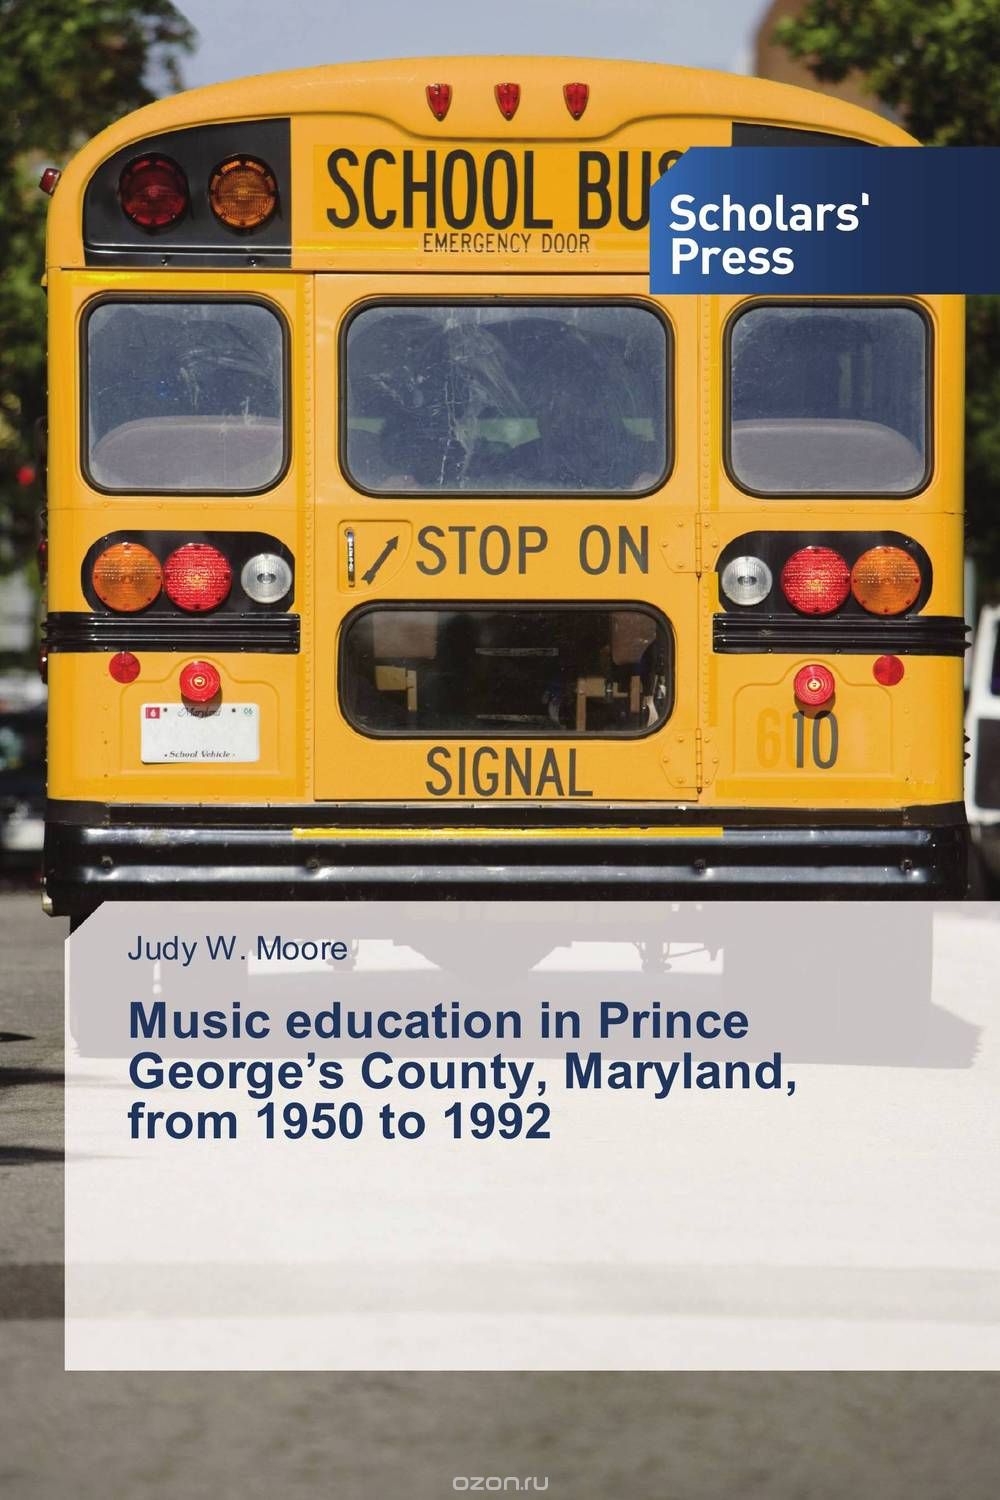 Скачать книгу "Music education in Prince George’s County, Maryland, from 1950 to 1992"